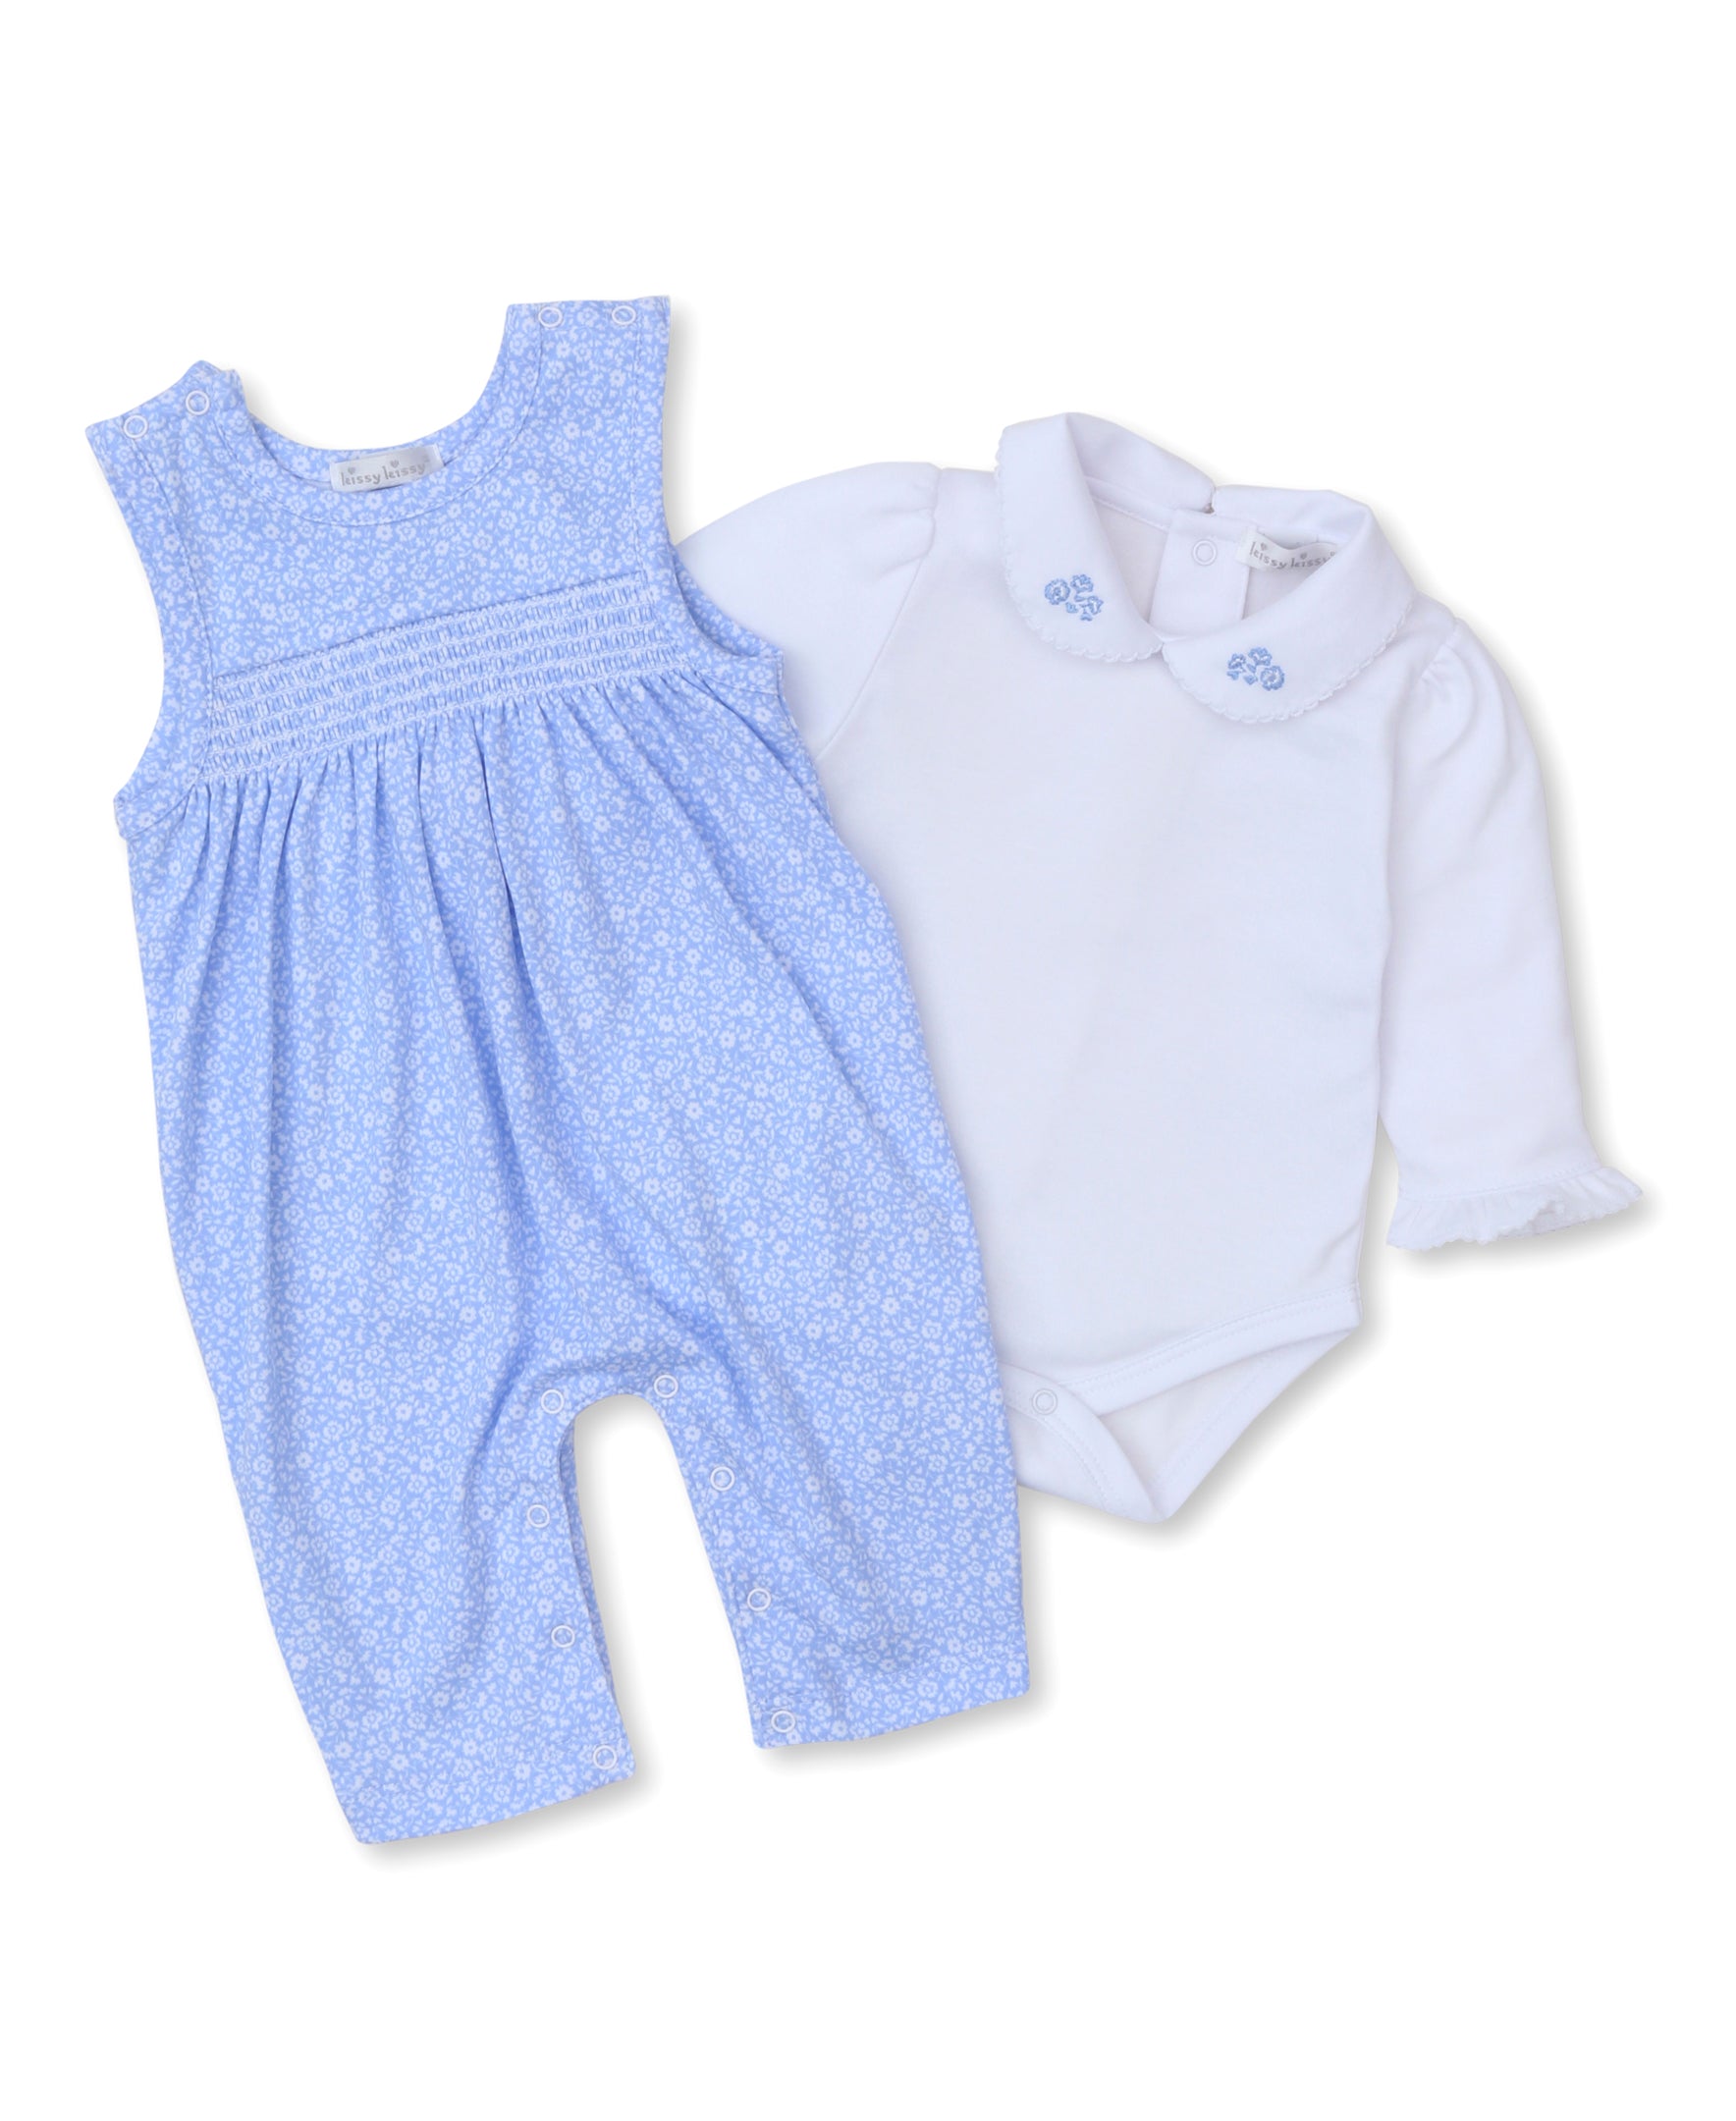 Blue Flower Patch Overall Set